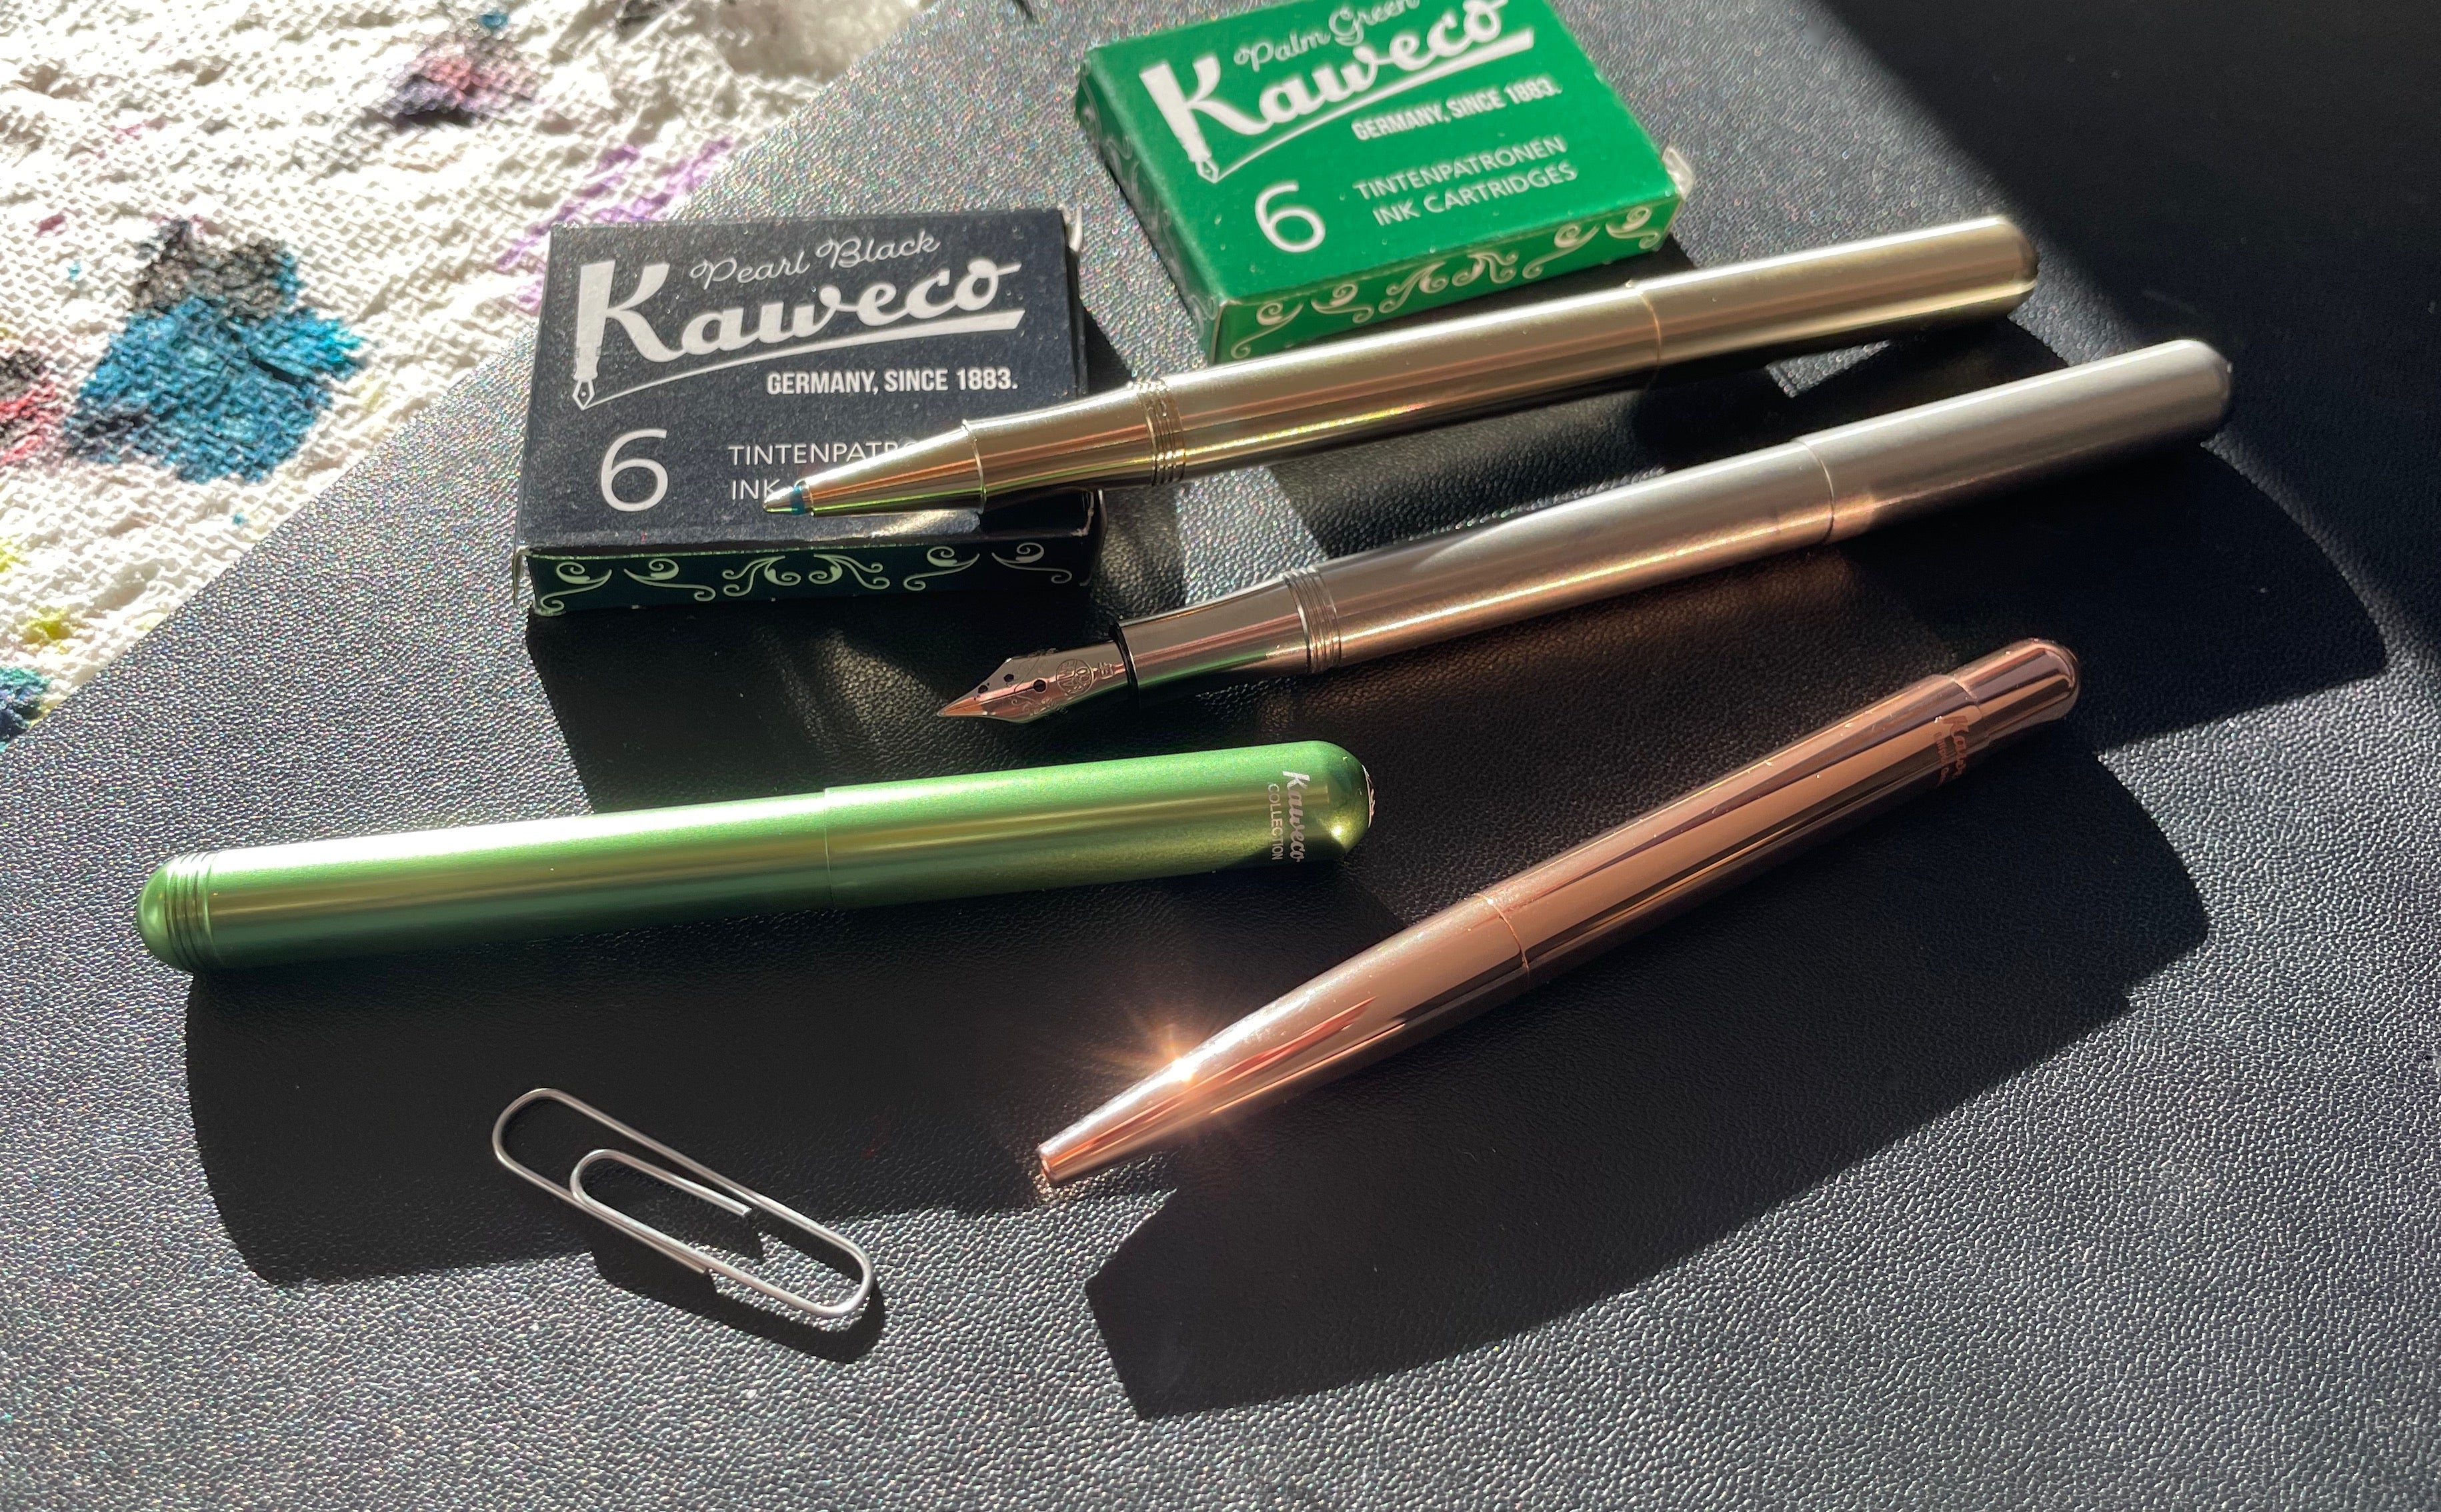 Loving the Little Liliput from Kaweco!